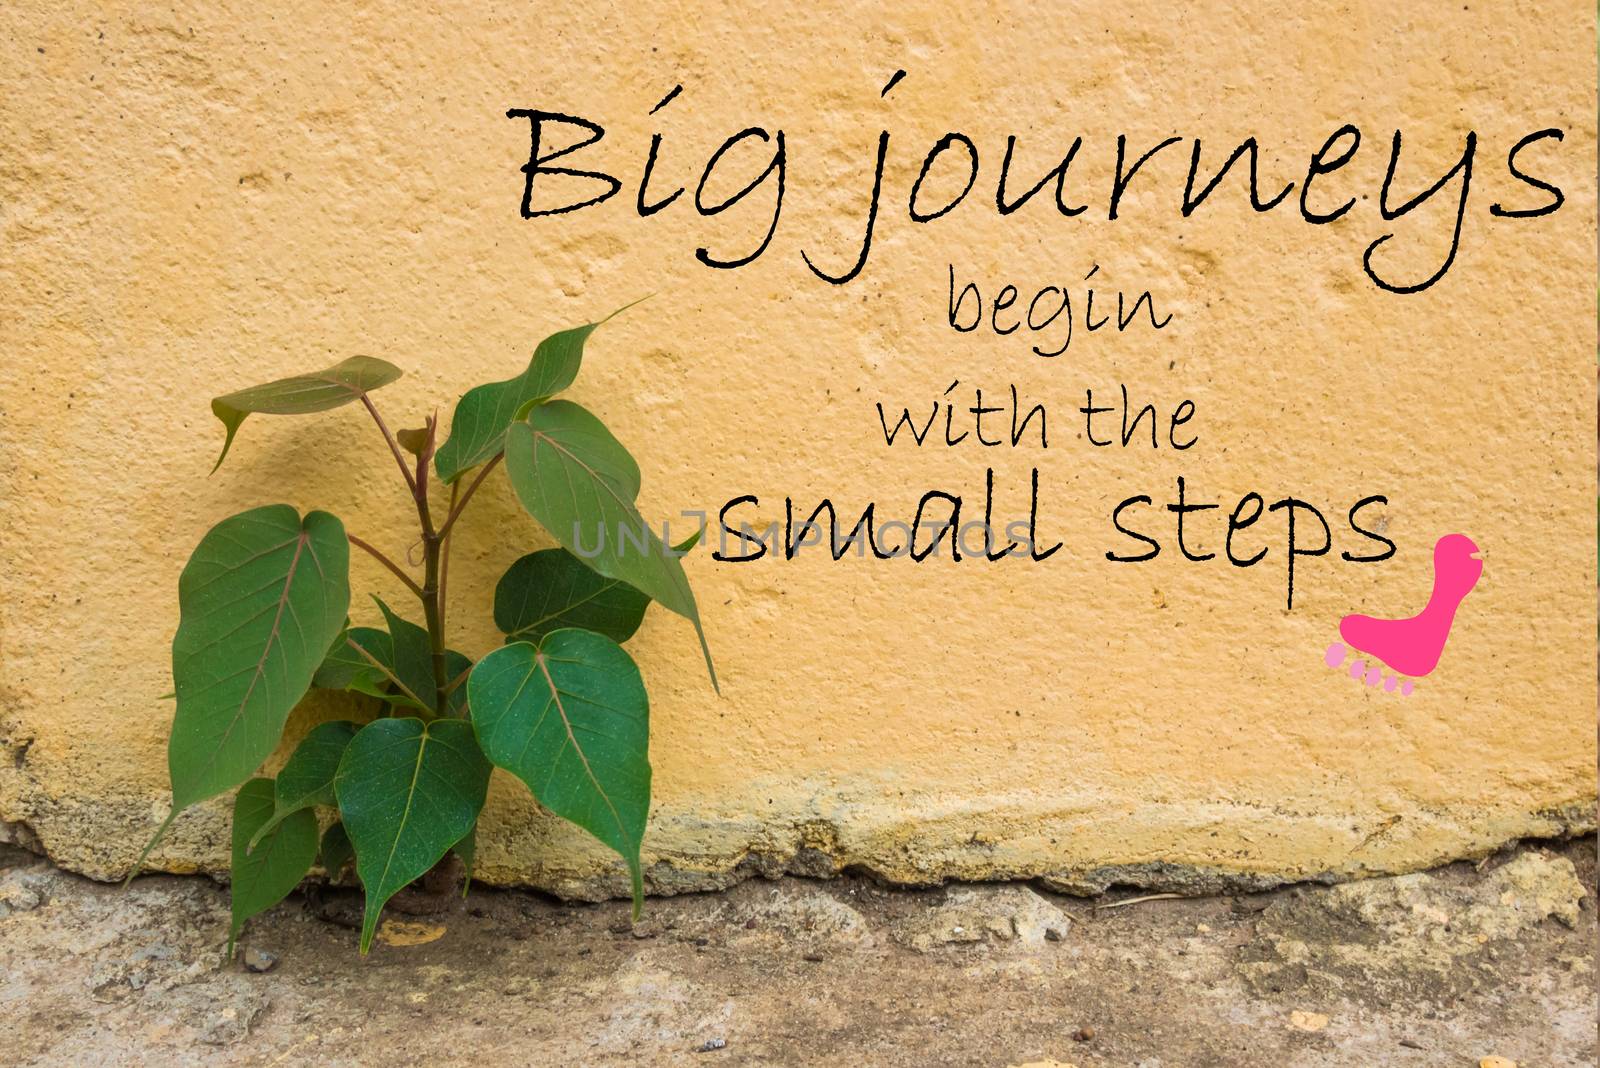 Word  Big journeys begin with the small steps.Inspirational motivational quote on old stone wall with tree for background by phatpc